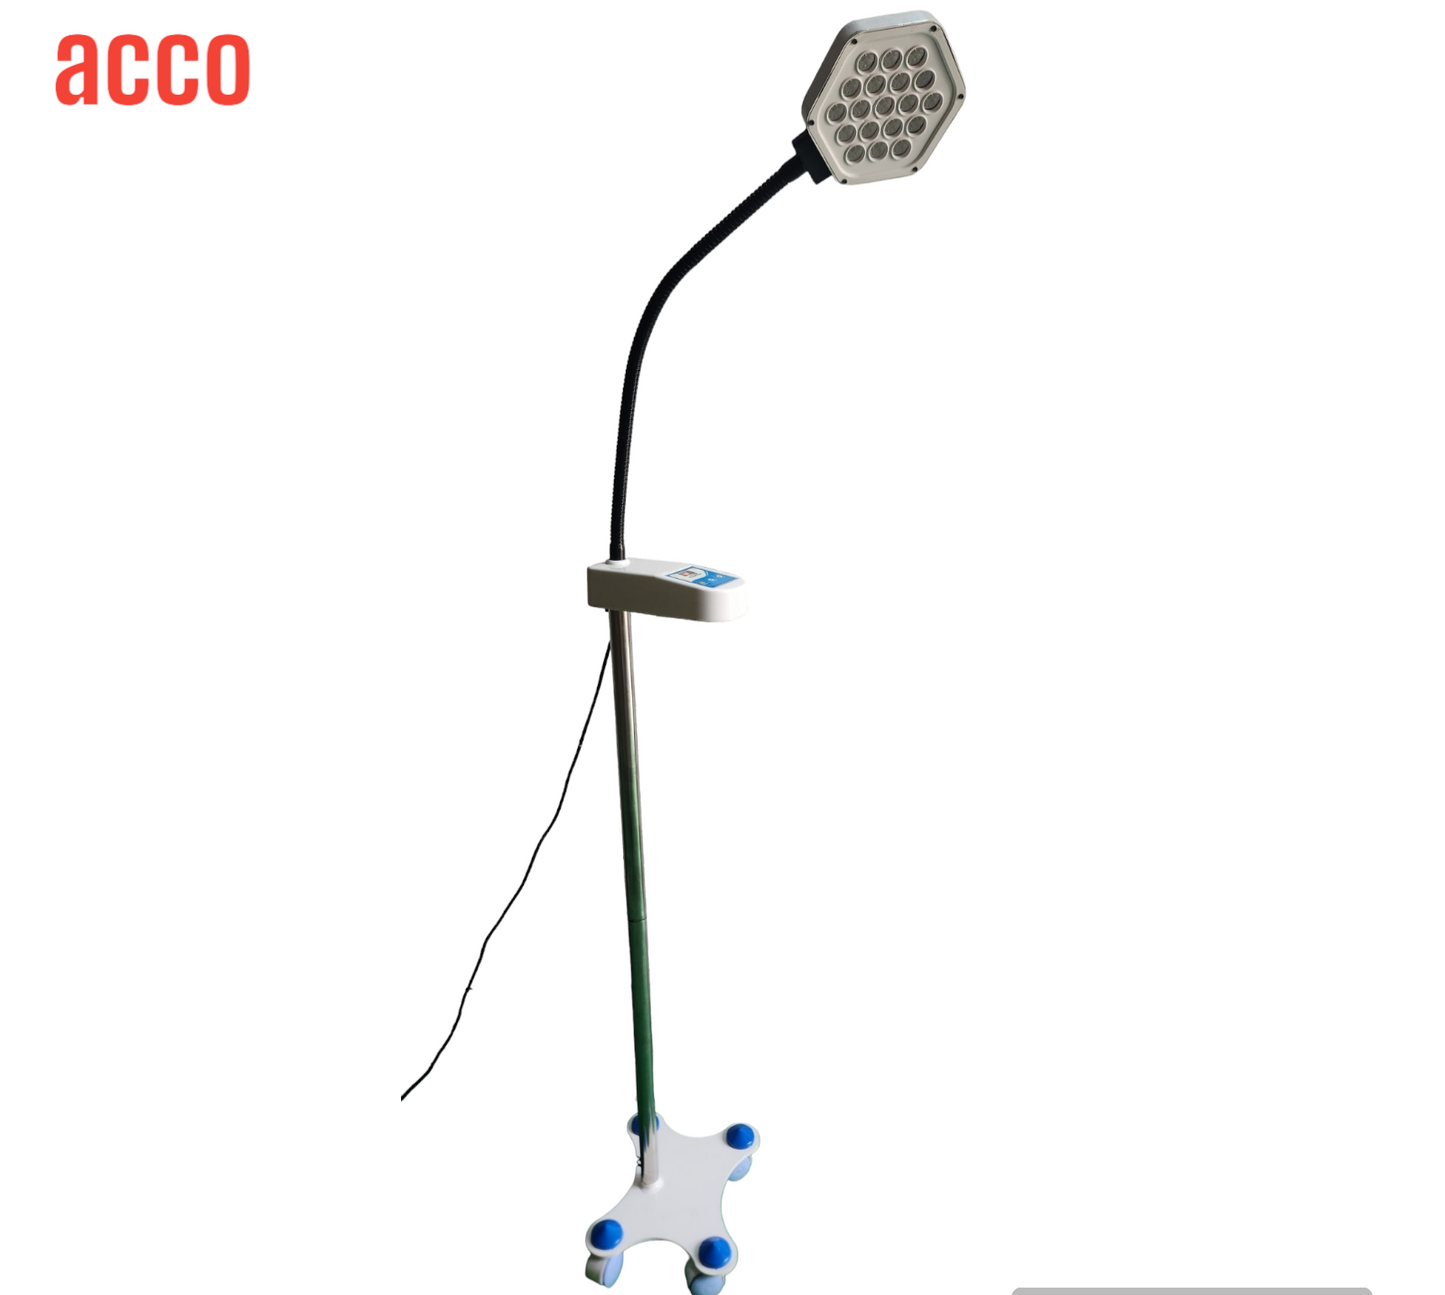 acco Examination OT Light with 19 Led Mobile 60000 LUX Glass Examination OT Light (White)